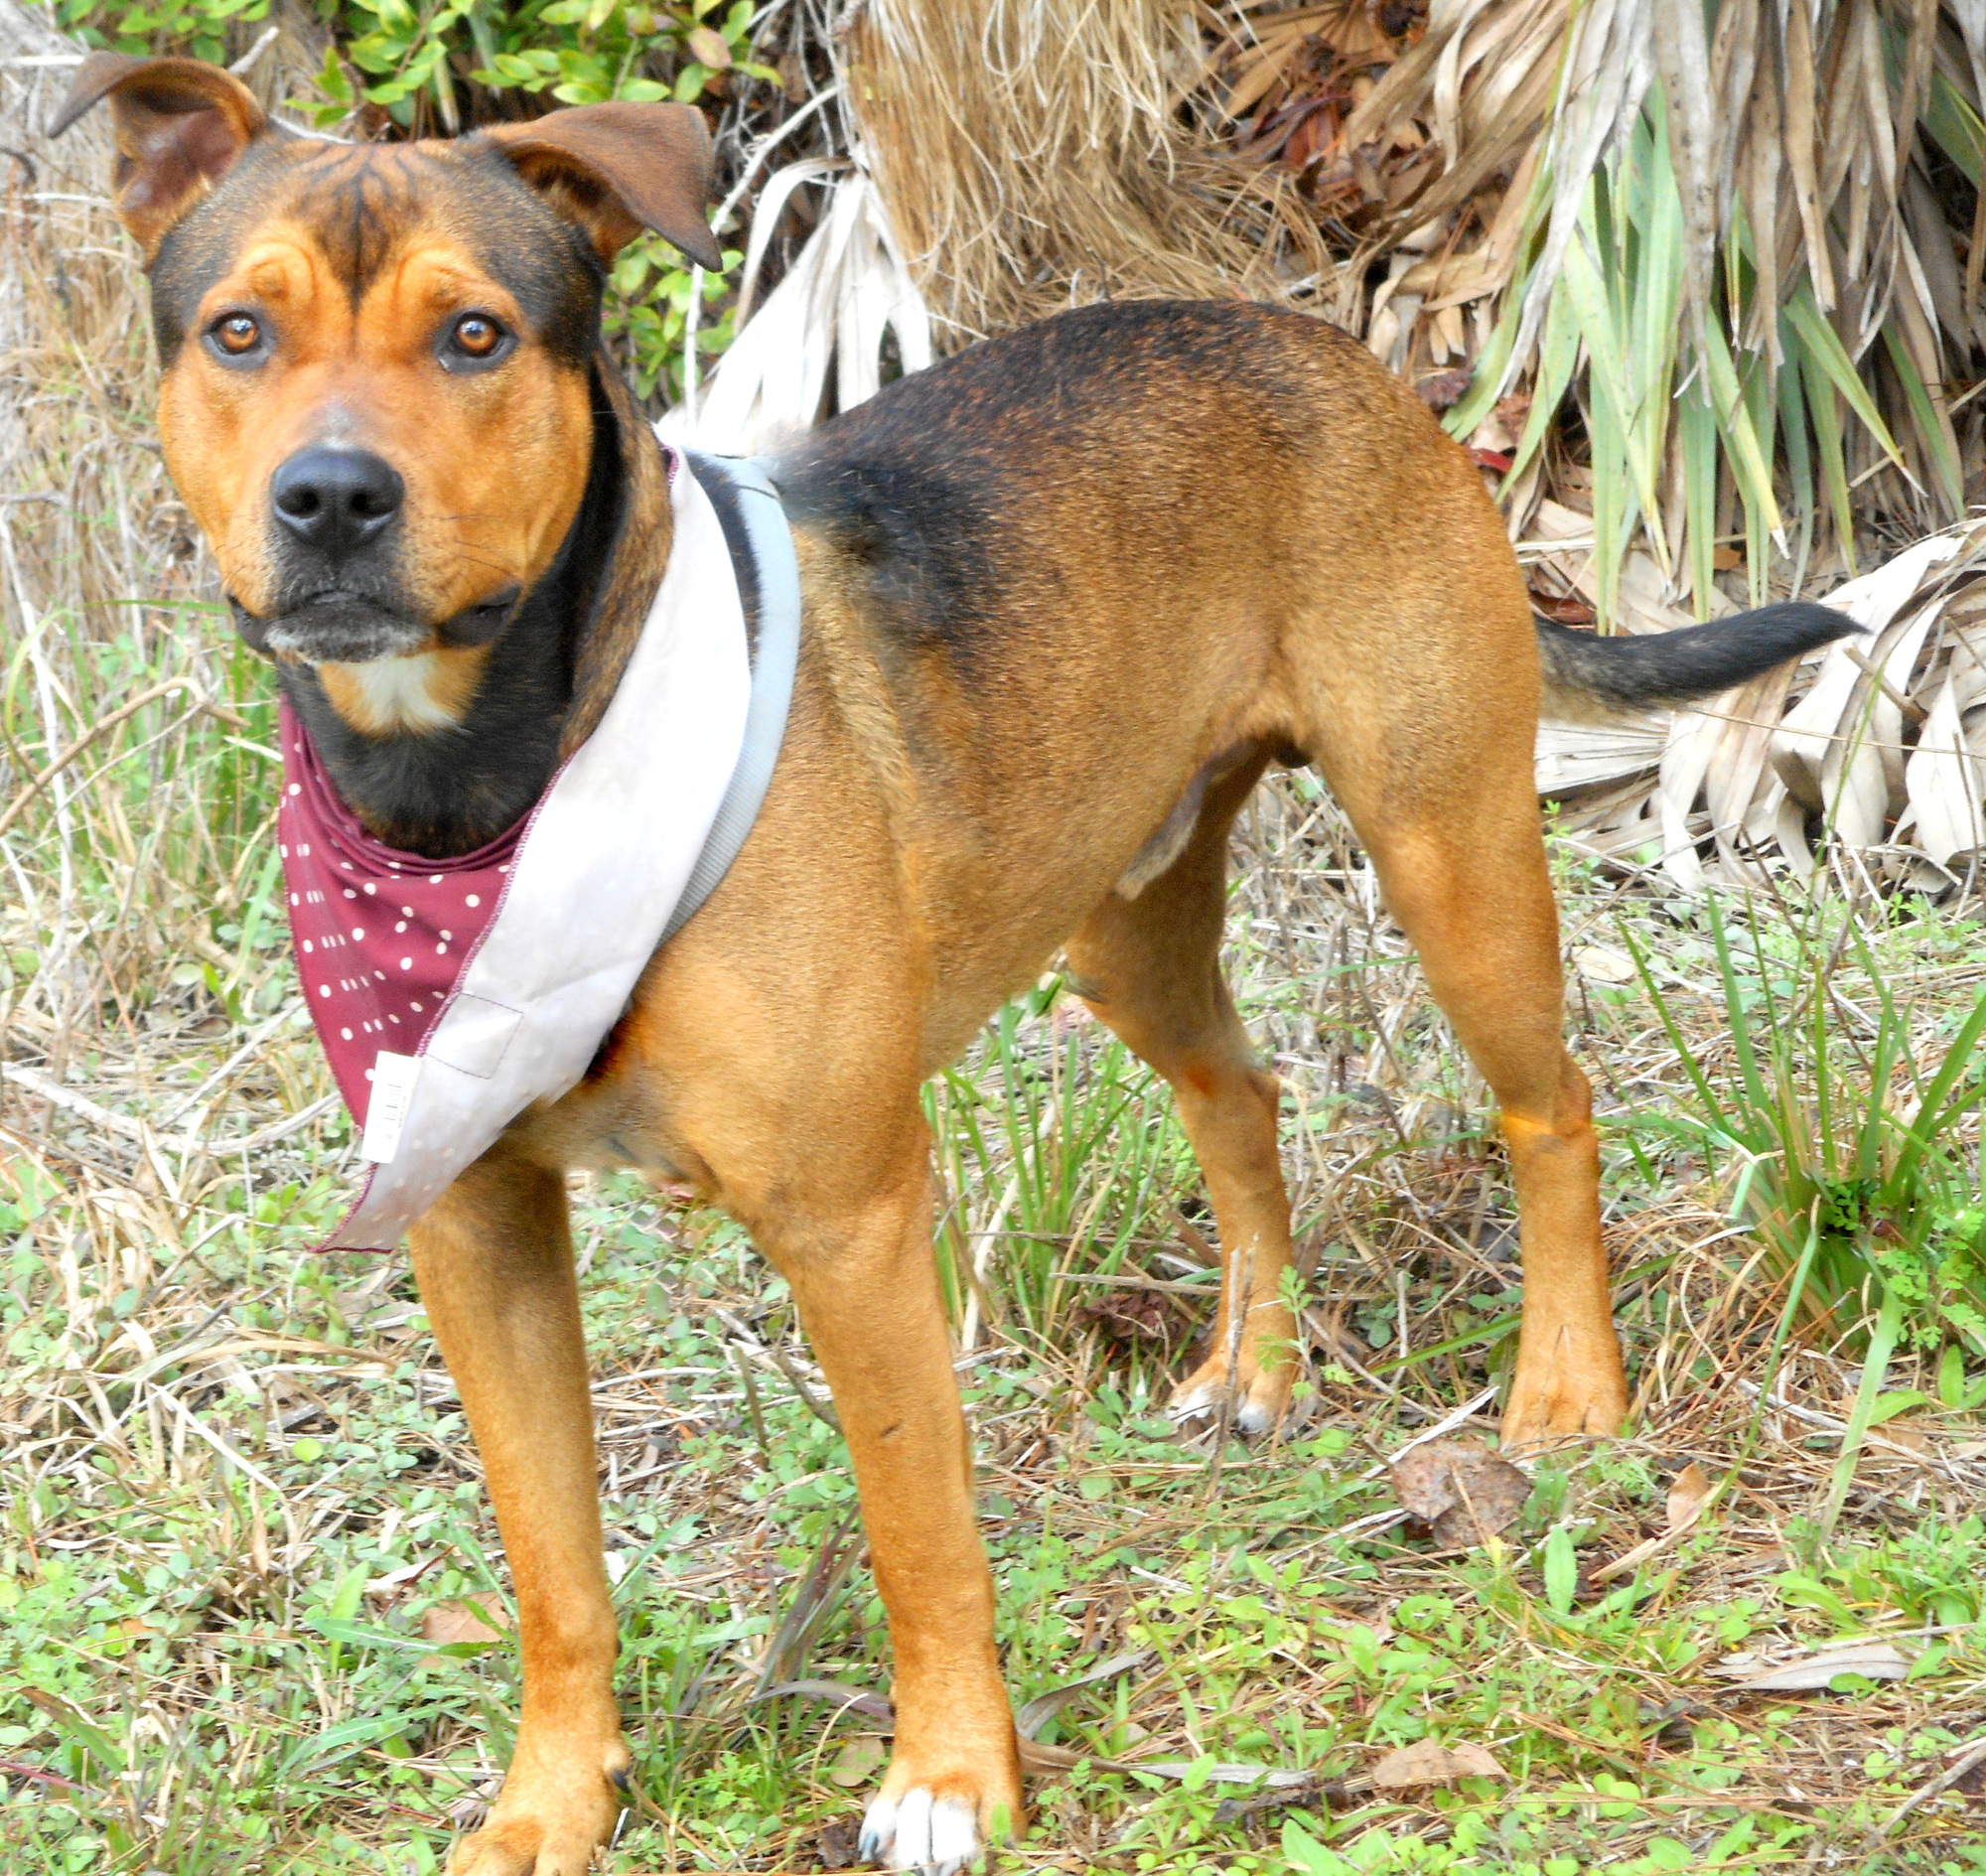 Nite Owl - 37460189, 5-year-old male terrier/rotty mix. Photo courtesy of Katie Share